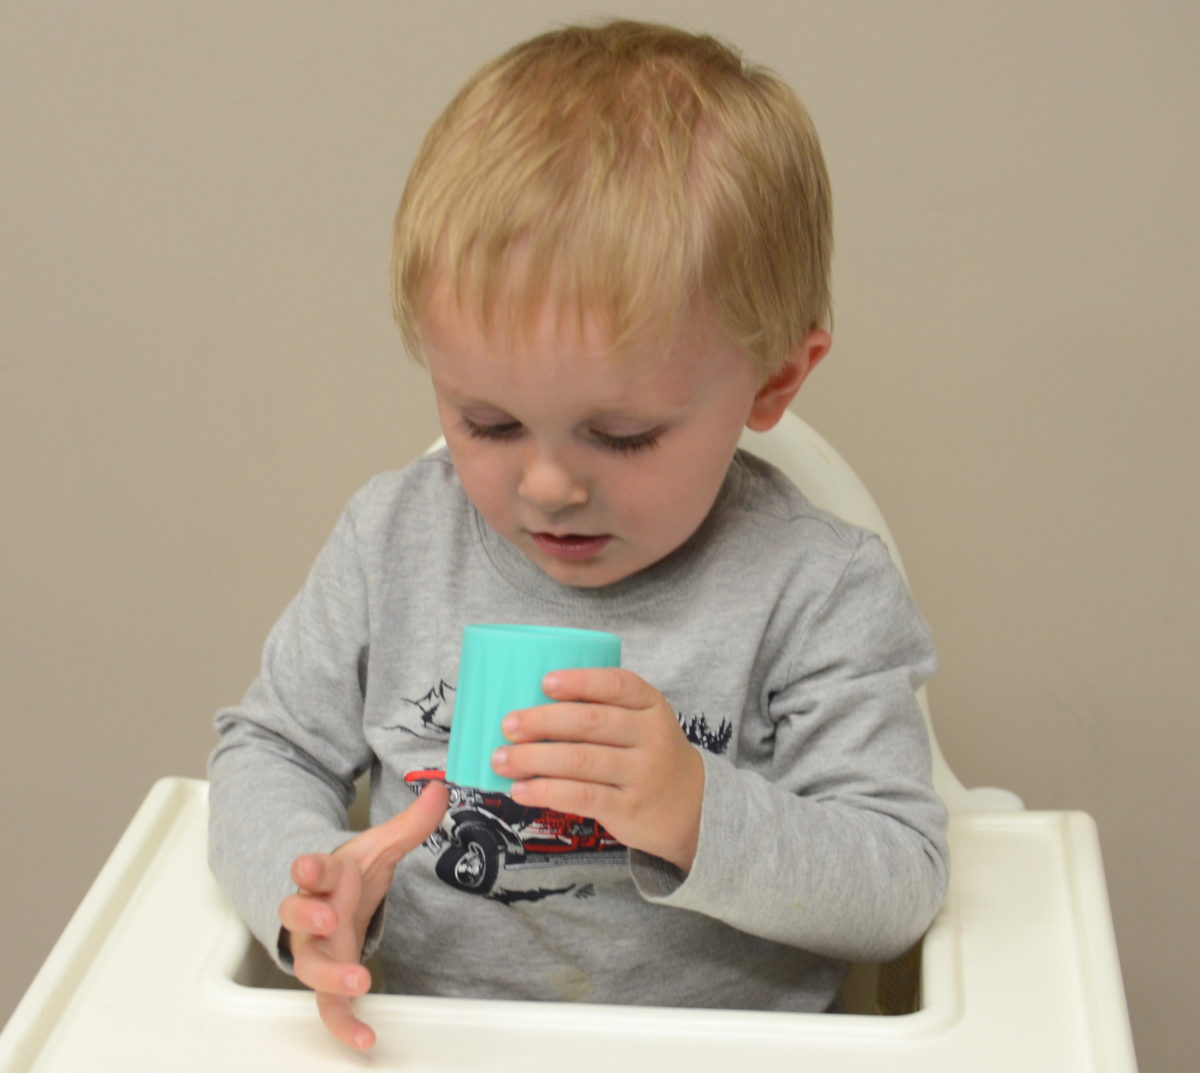 Silicone Tiny Cup - Teal